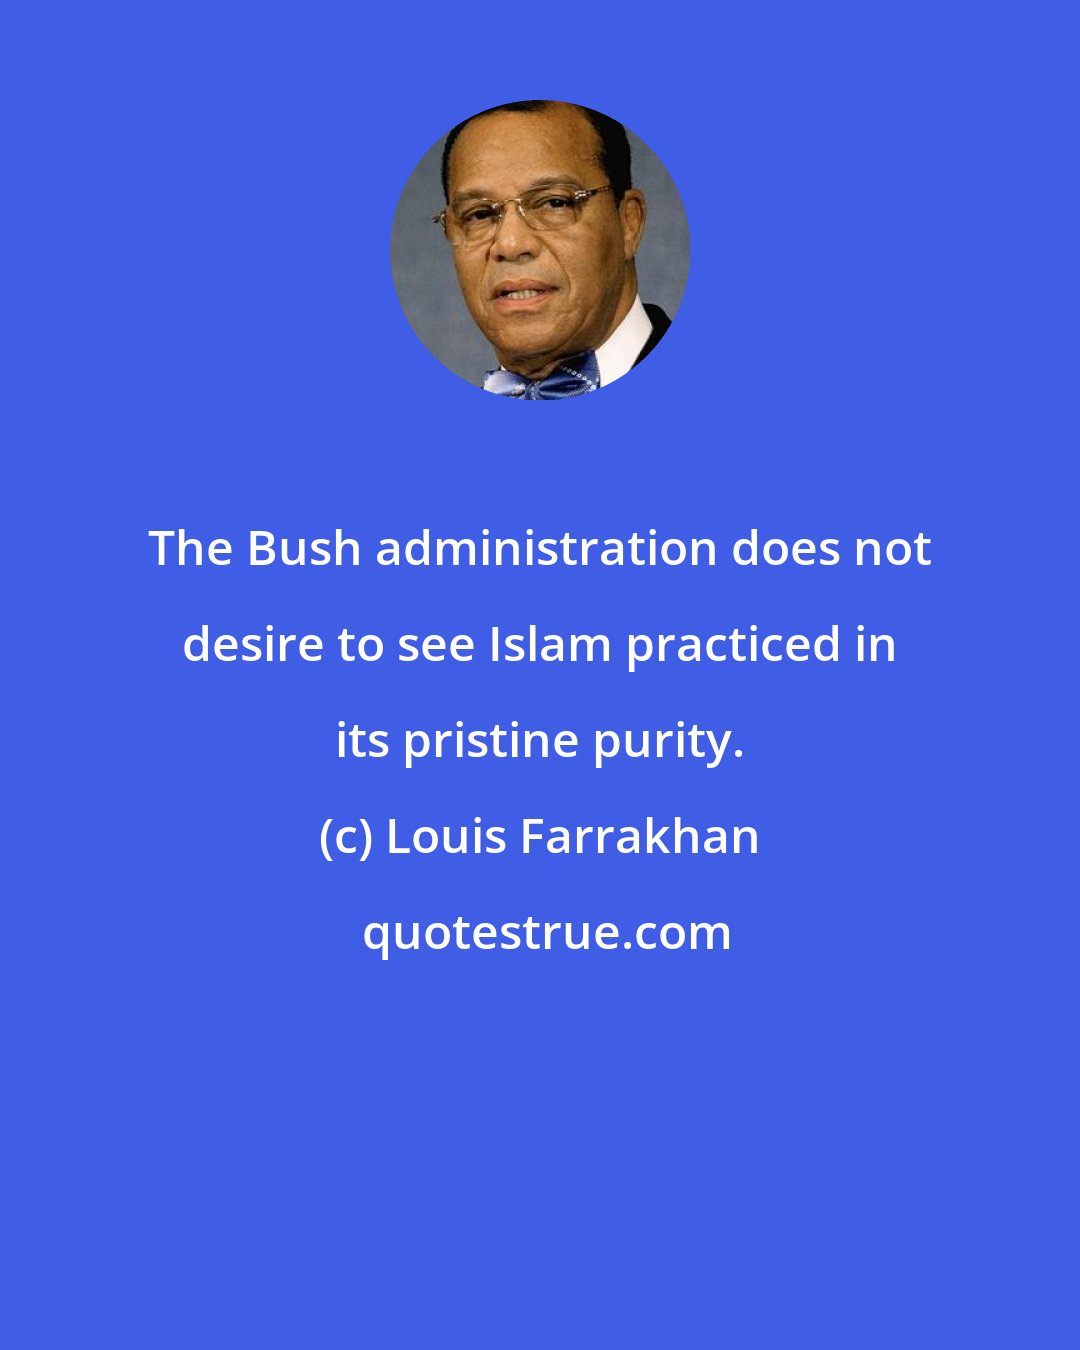 Louis Farrakhan: The Bush administration does not desire to see Islam practiced in its pristine purity.